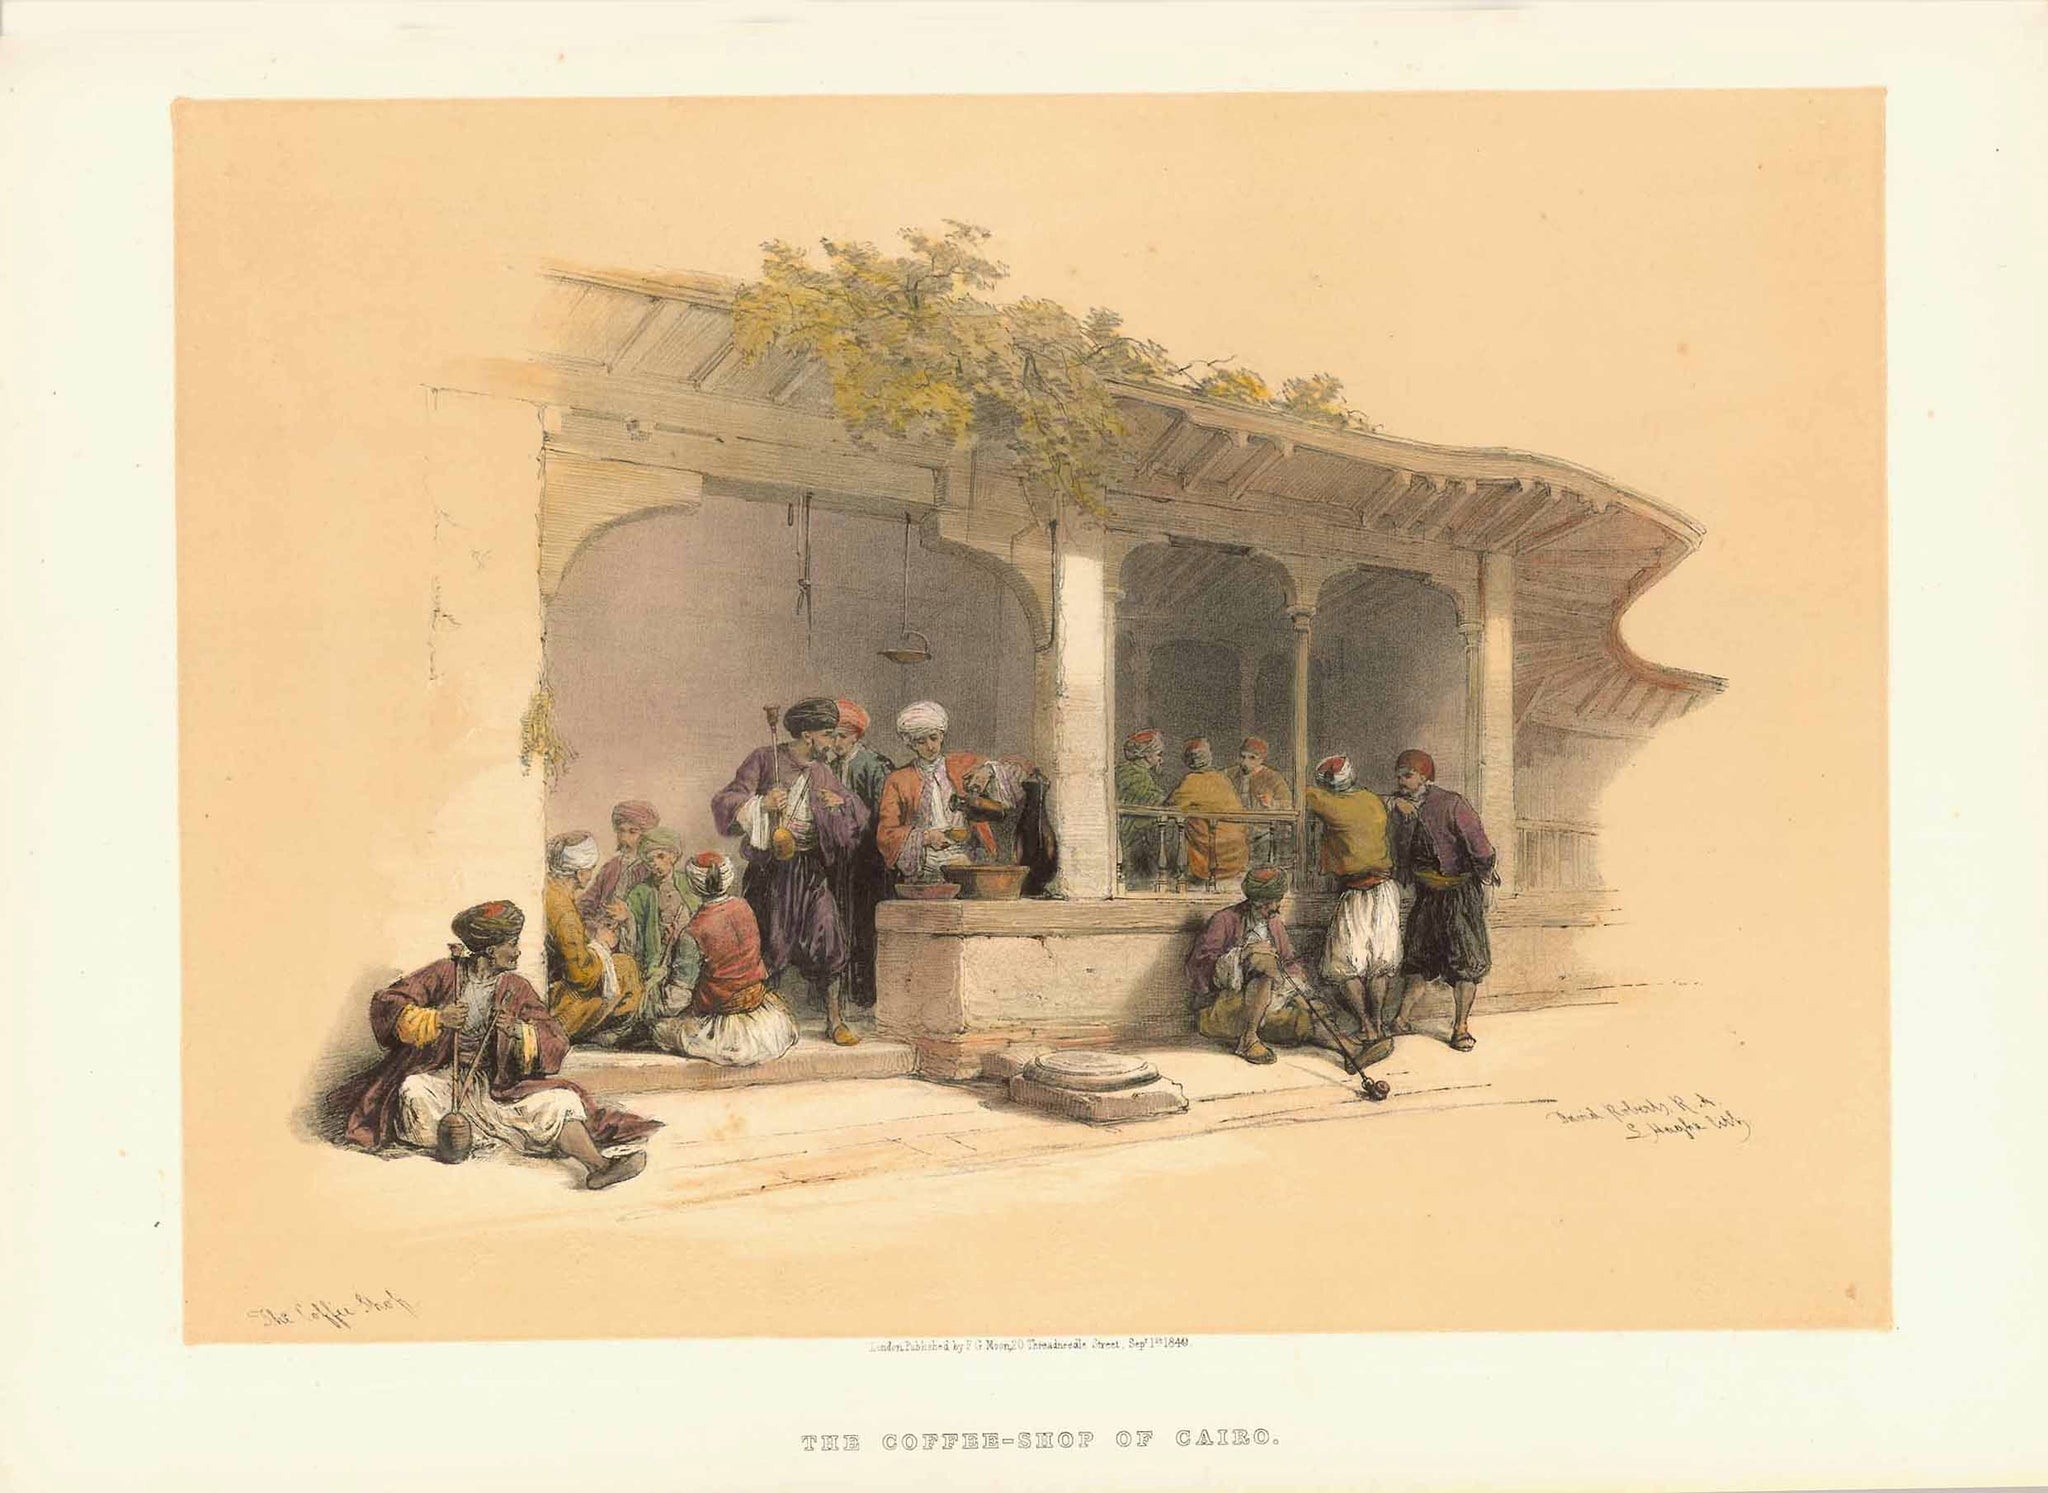 "The Coffee-Shop of Cairo"  Image is on a full page with text below and on reverse side.  The text describes the role of the coffee house in Oriental culture. At the time there were over 1000 coffee shops in Cairo. On the reverse side is an article about various mosques, especially the interiors., interior design, wall decoration, ideas, idea, gift ideas, present, vintage, charming, special, decoration, home interior, living room design